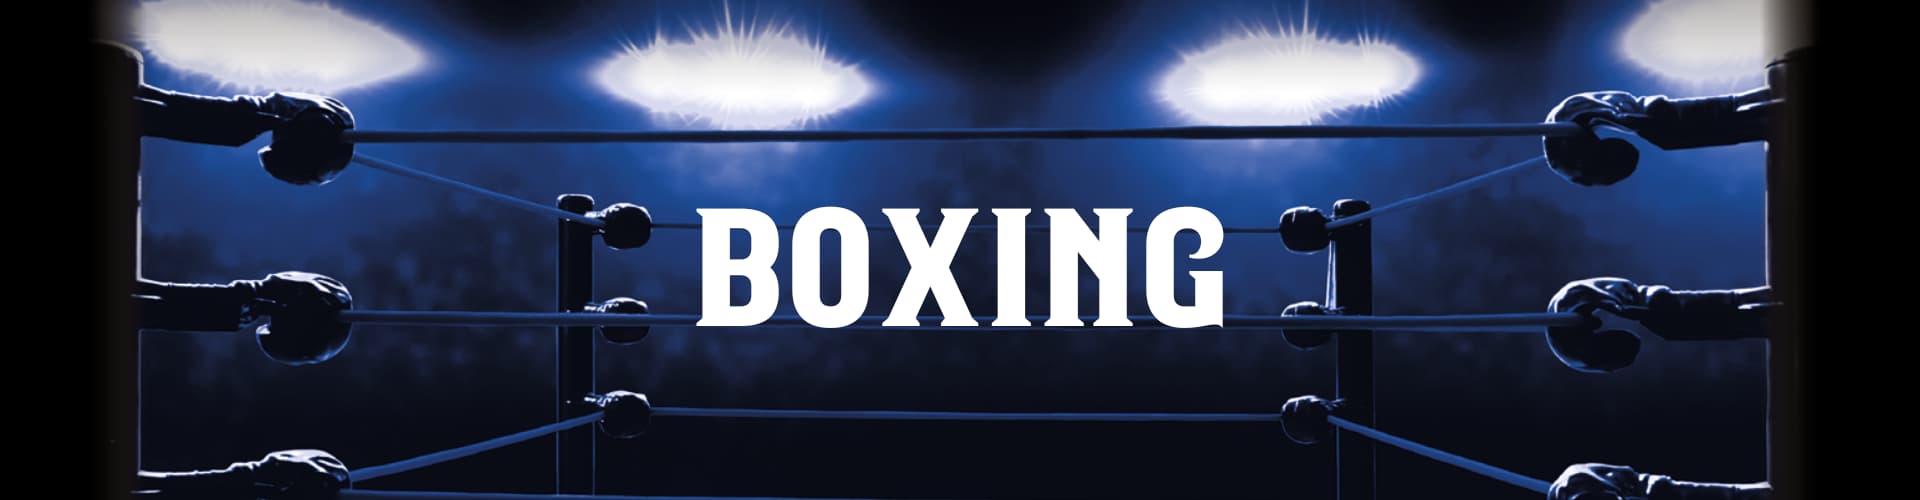 Watch Live Boxing in Inverness at Lauders Pub